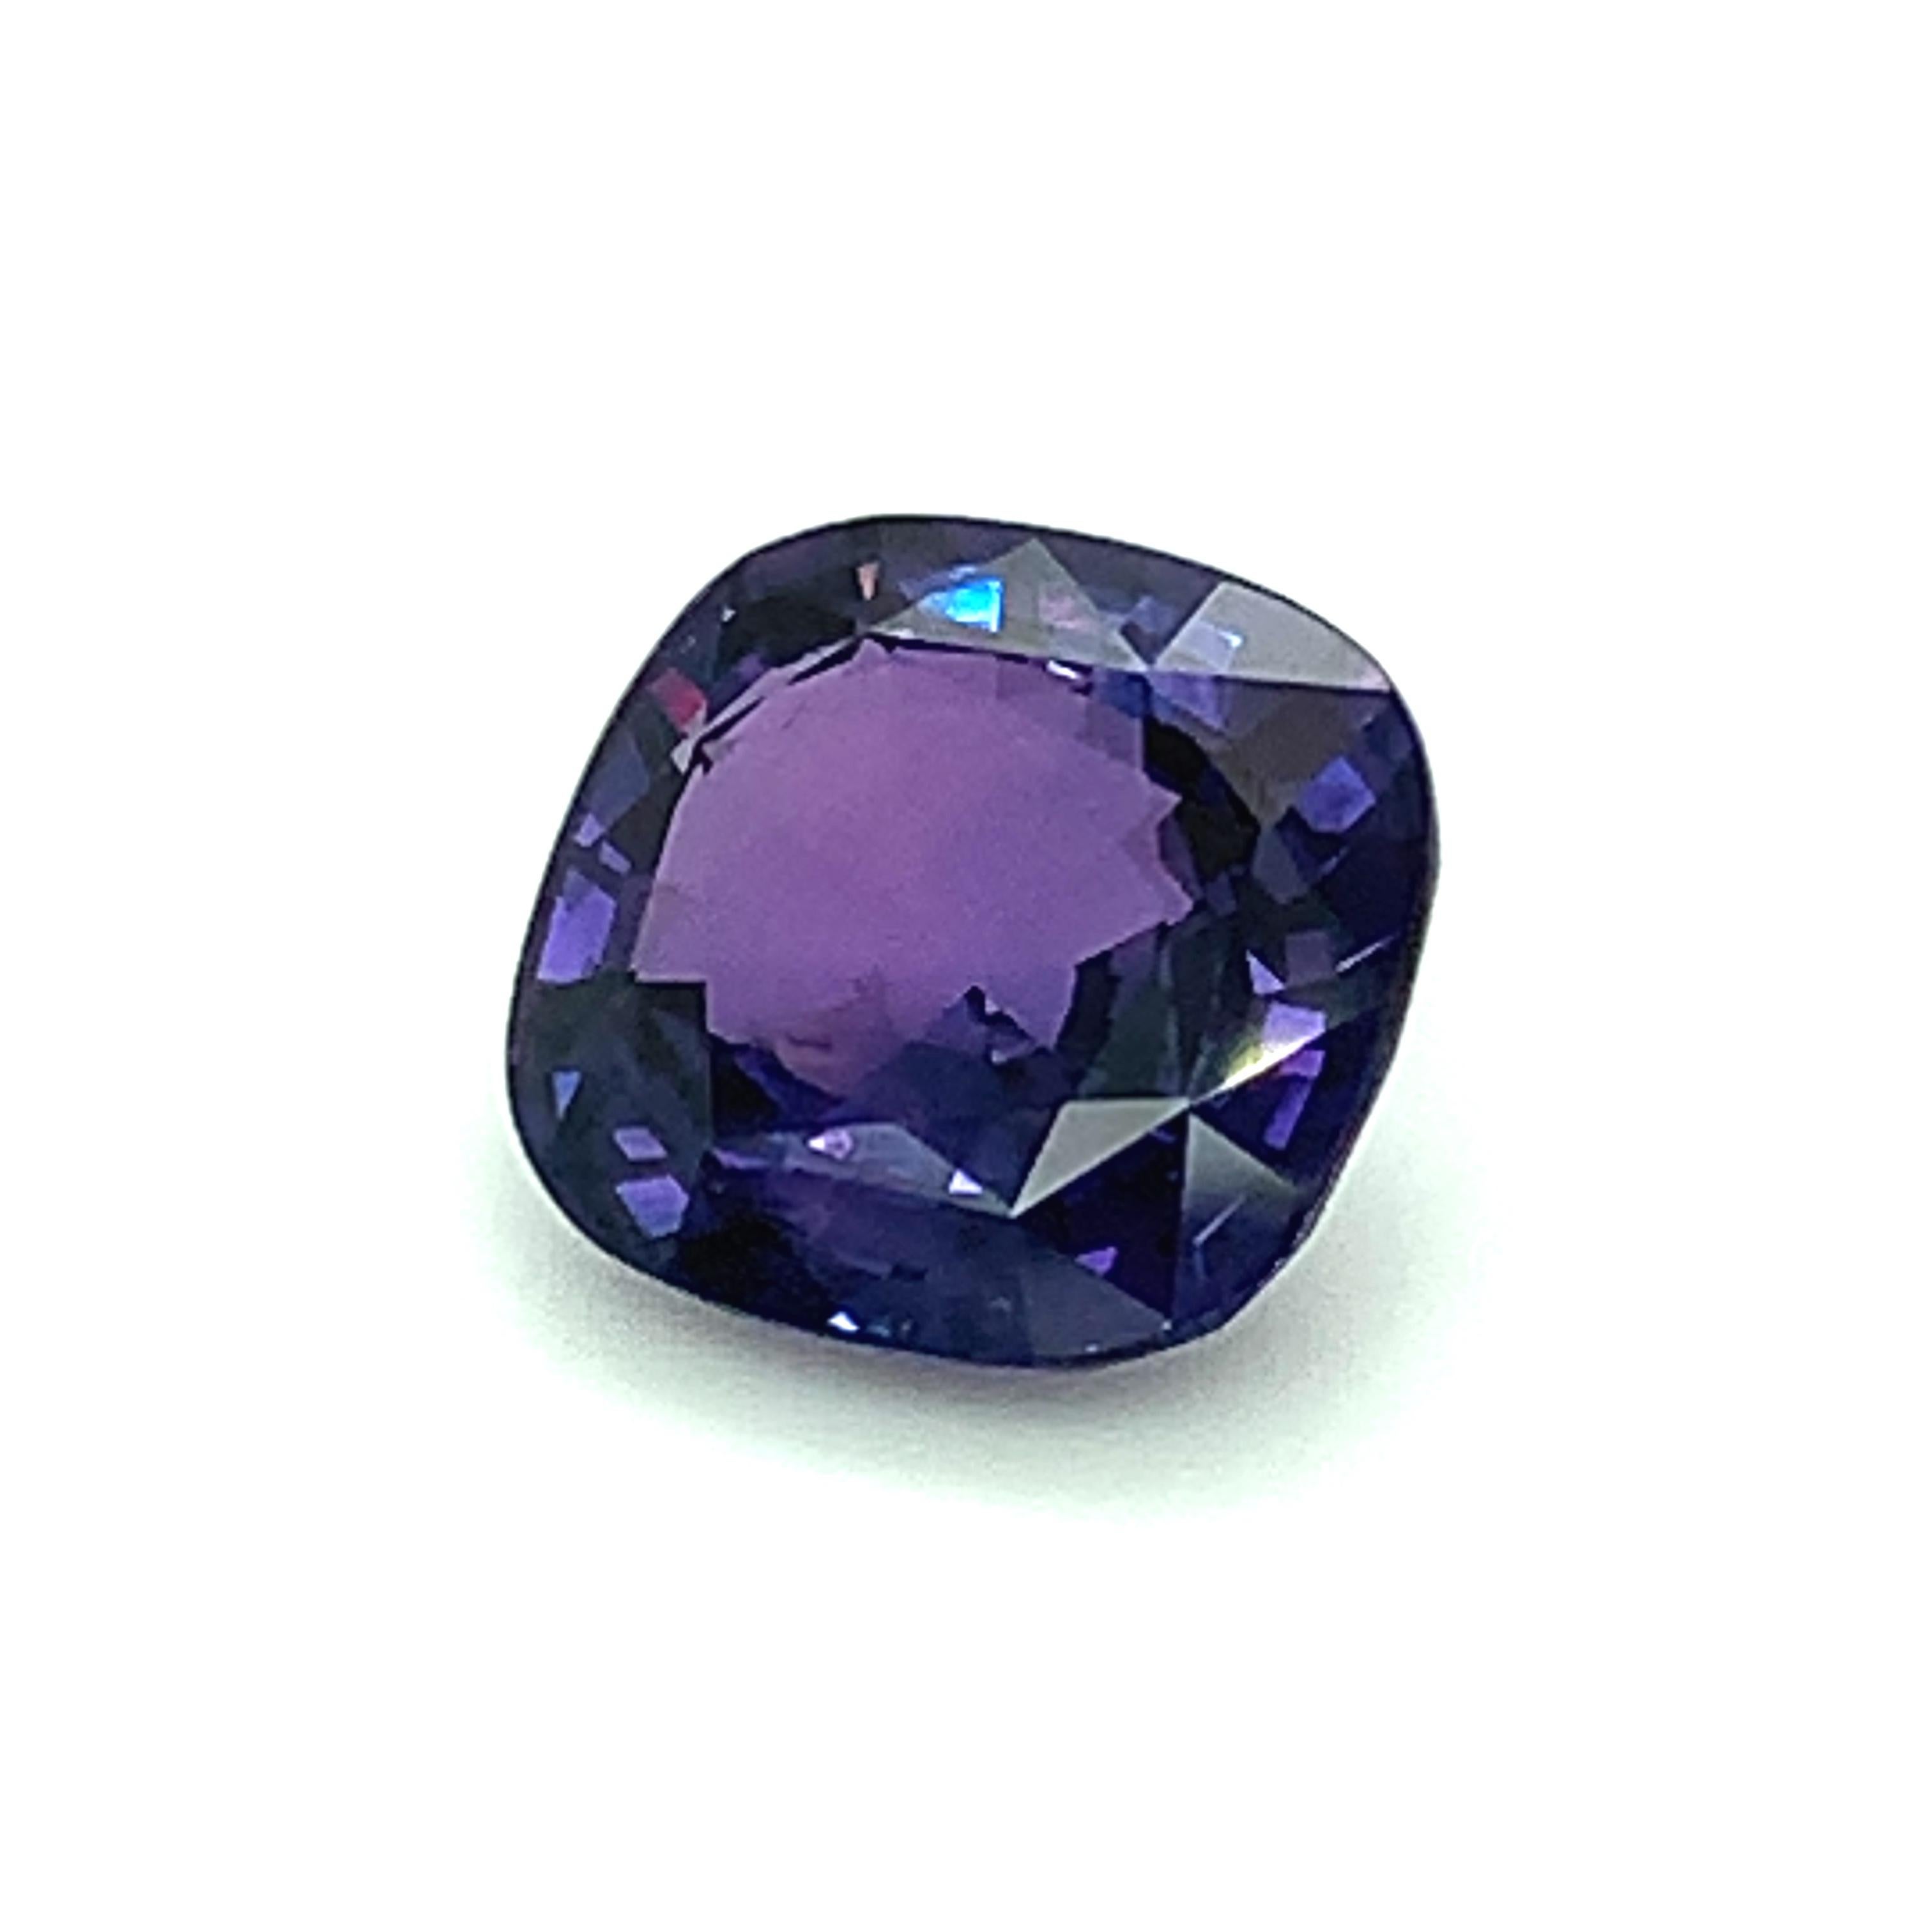 6.76 Carat Color Change Sapphire Cushion, Unset Loose Gemstone, GIA Certified 2